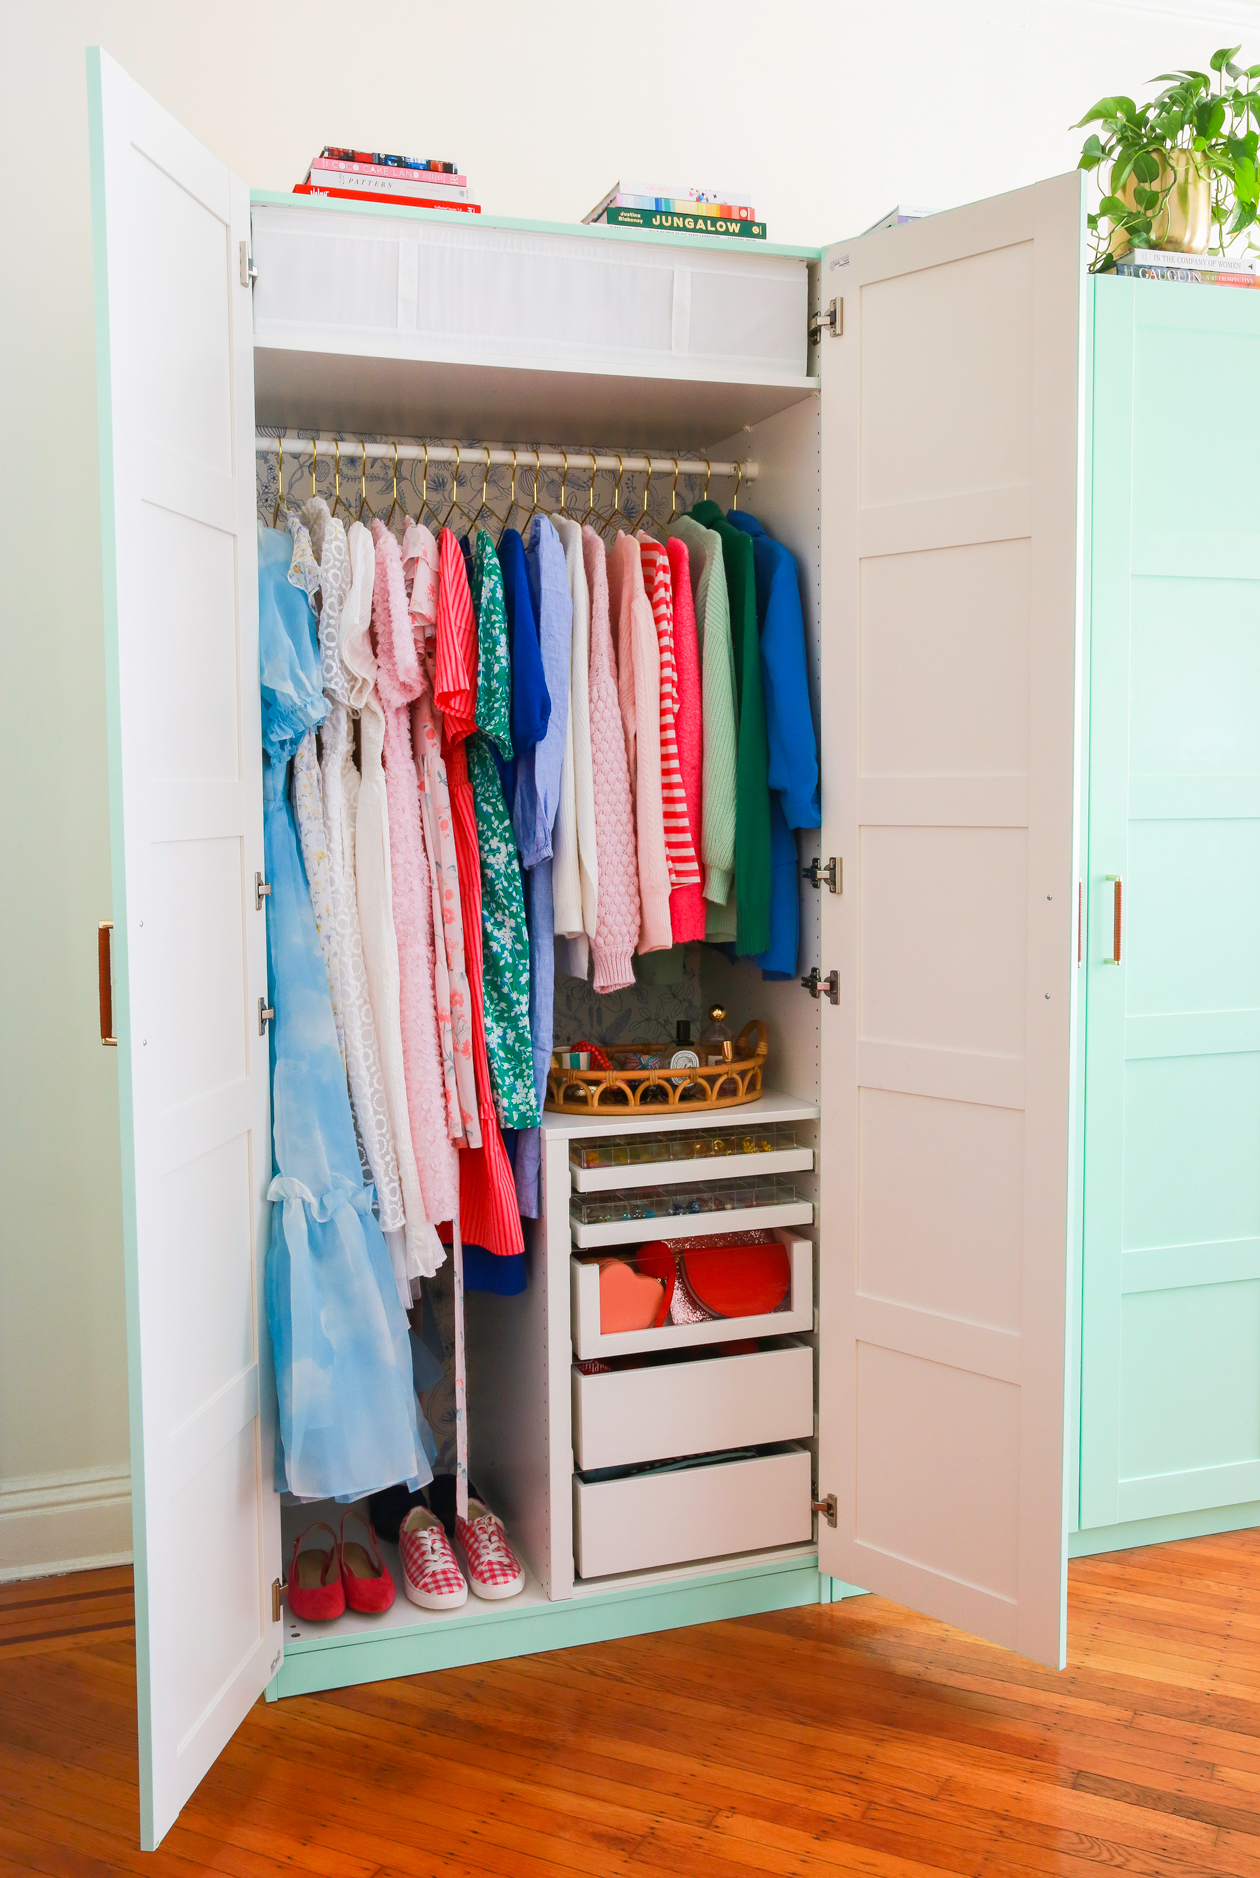 Ikea Pax Wardrobe Hack: Reveal. Learn how to paint ikea furniture and how to add color to your bedroom with this Ikea Pax Wardrobe hack! 